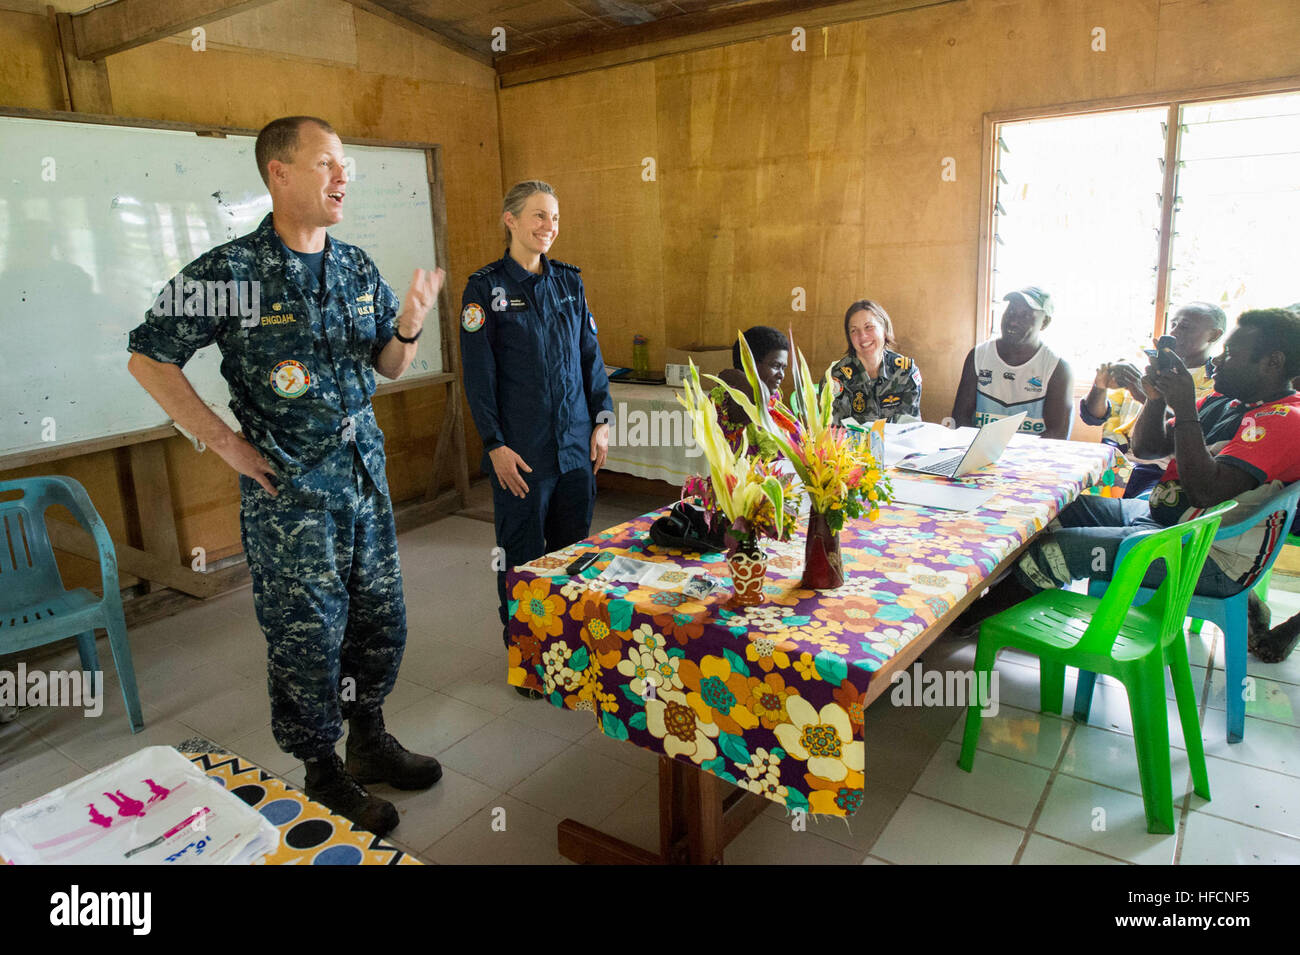 ARAWA, Autonomous Region of Bougainville, Papua New Guinea (July 2, 2015) Capt. Chris Engdahl, Pacific Partnership 2015 mission commander, and Royal New Zealand Air Force Wing Cmdr. Jennifer Atkinson, Pacific Partnership 2015 chief of staff, talk to Bougainville community leaders during a family violence prevention workshop at the Tuniva Learning Center. The group met to discuss how to prevent domestic violence abuse as part of the National Action Plan on Women, Peace and Security. The hospital ship USNS Mercy (T-AH 19) is currently at its second mission port of Papua New Guinea as part of Pac Stock Photo